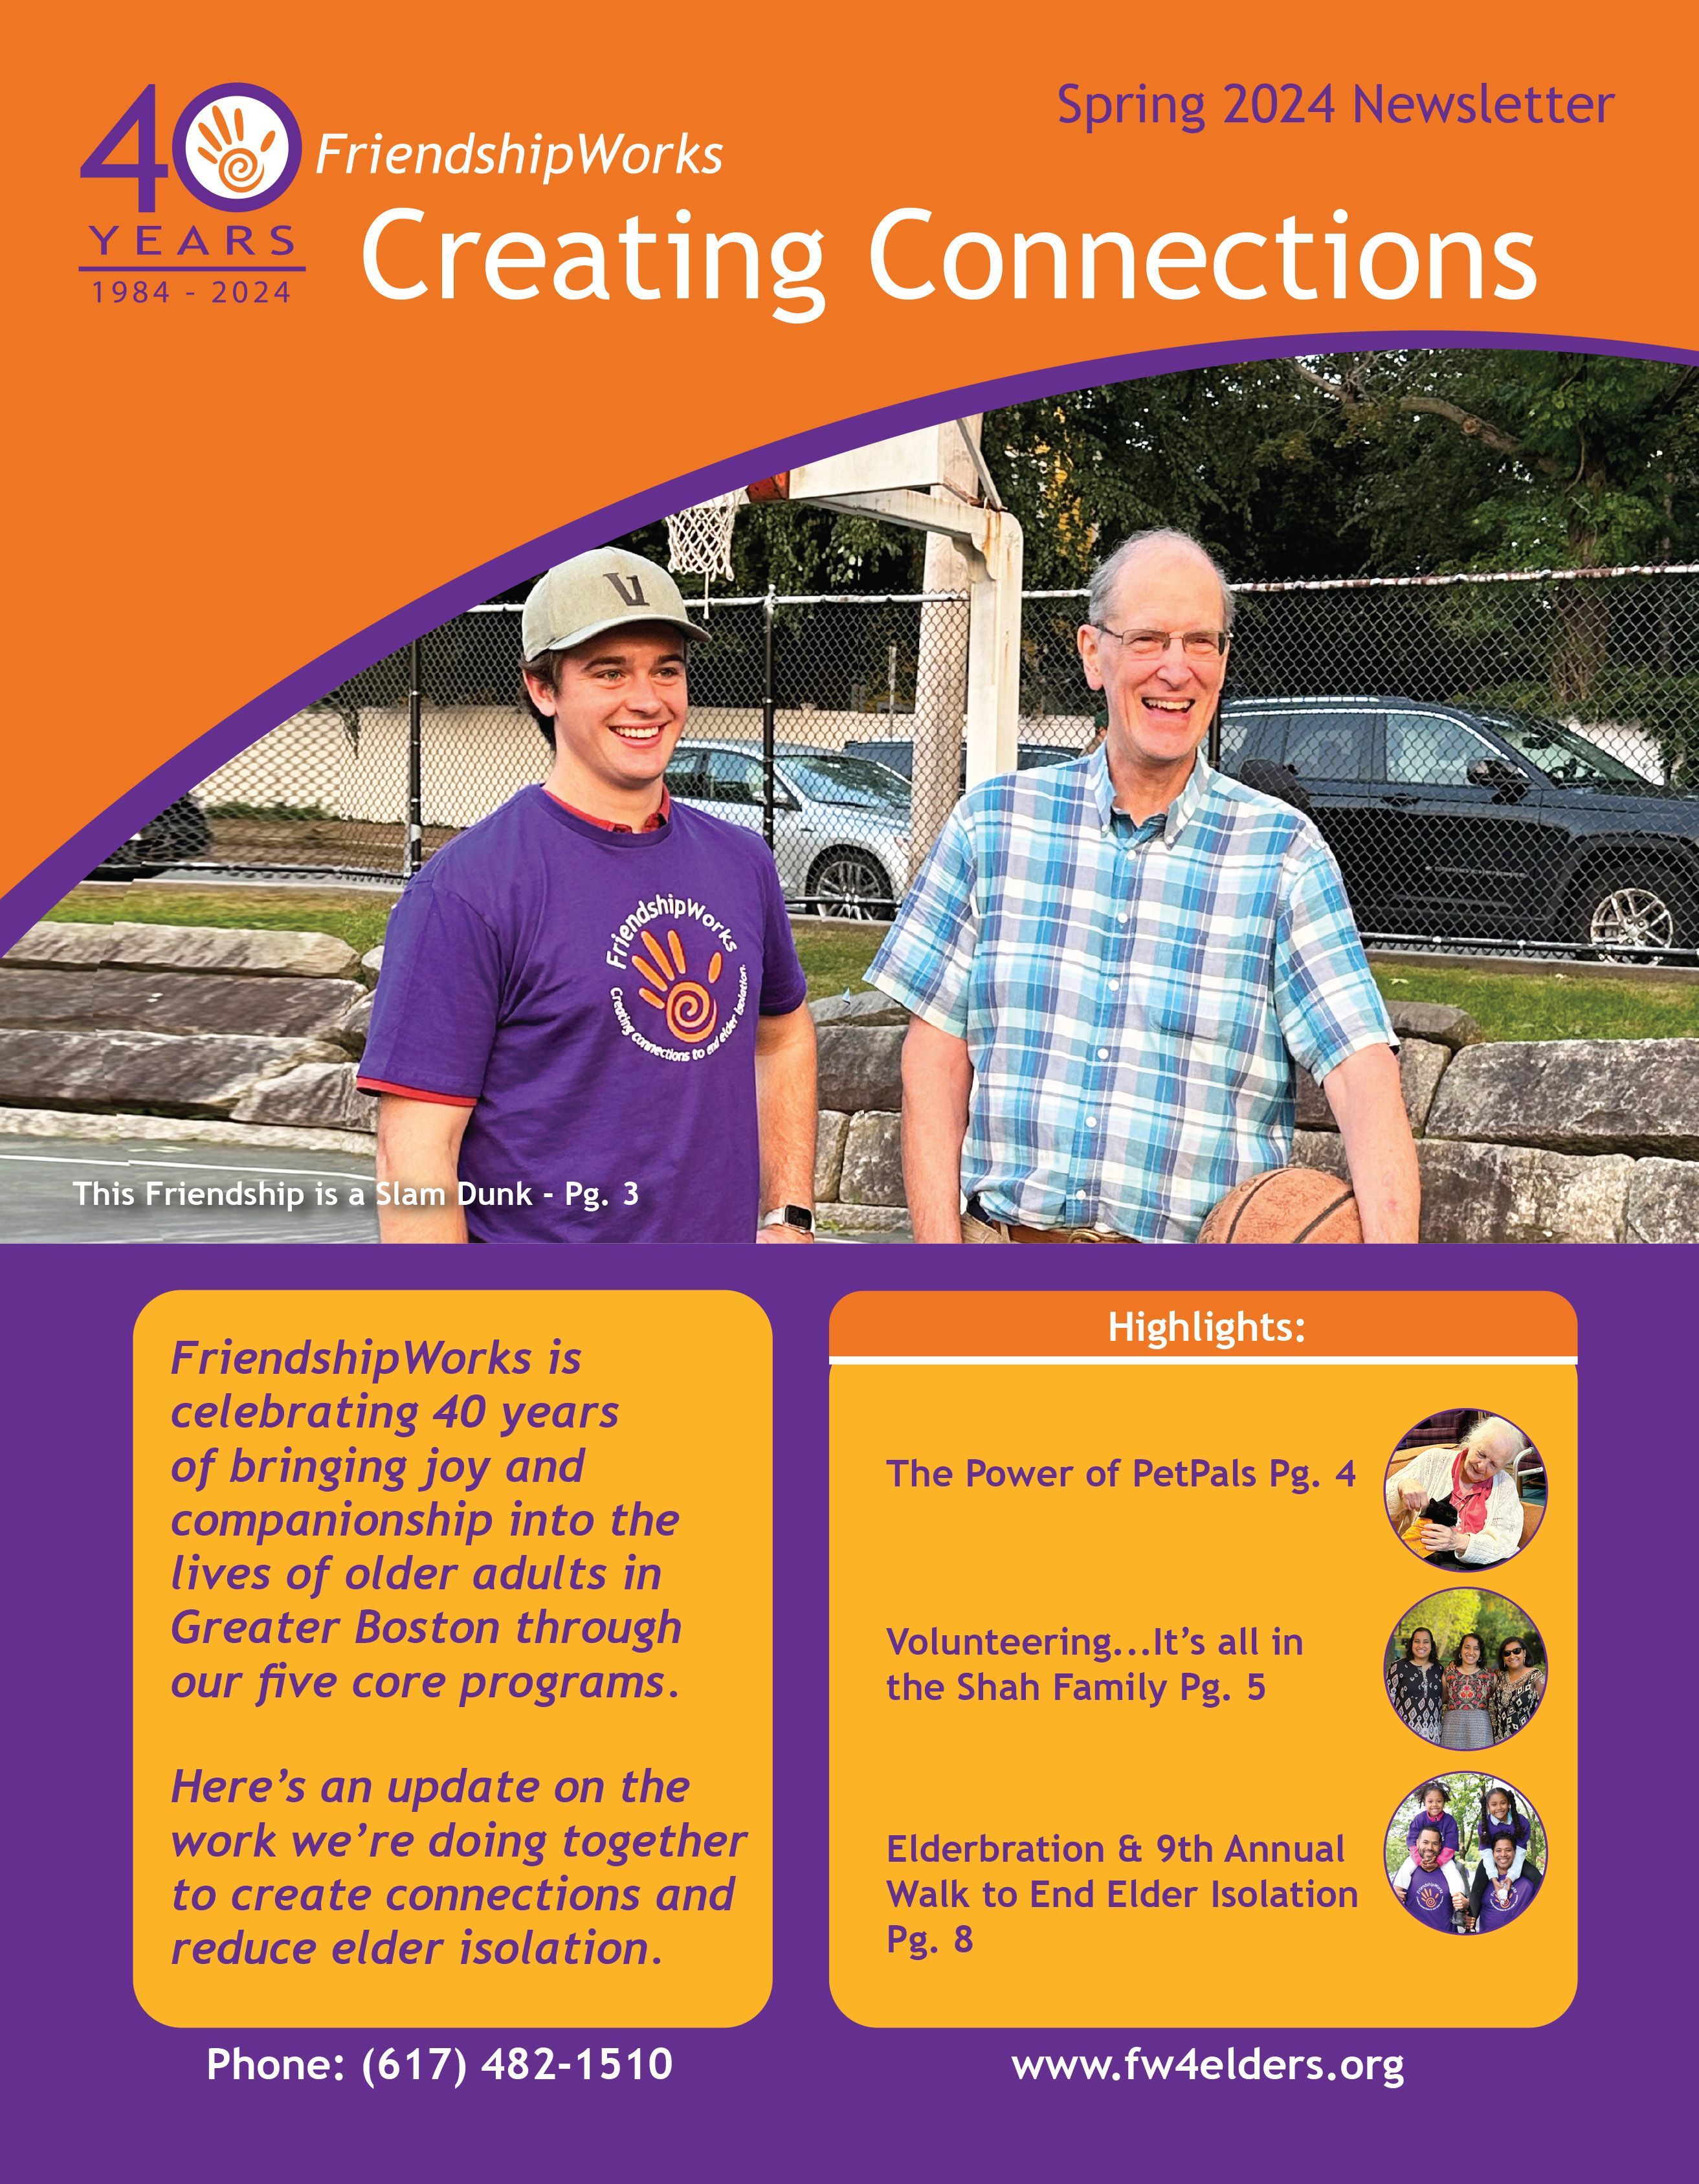 FriendshipWorks Creating Connections Newsletter Spring 2024